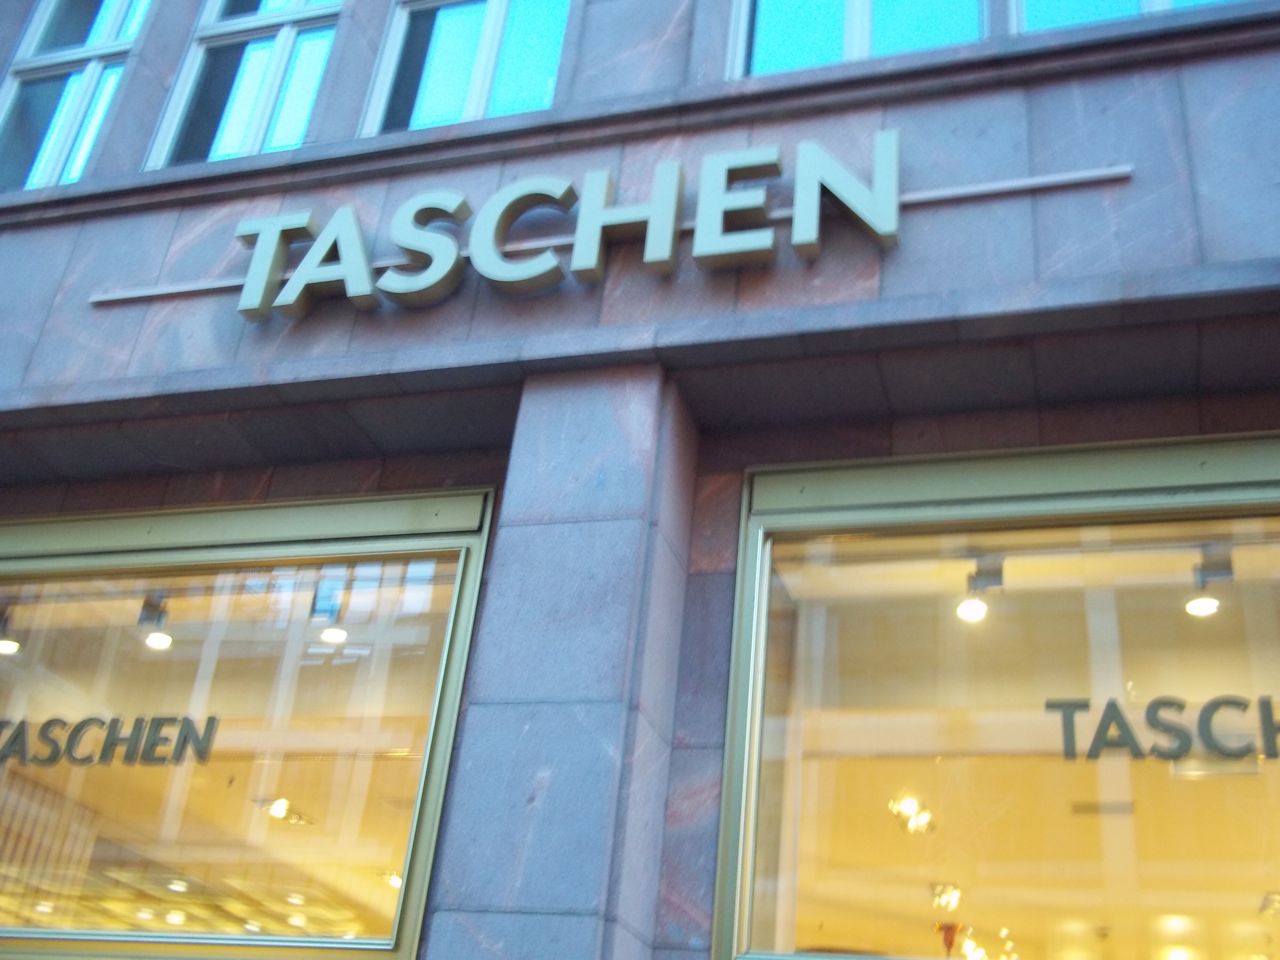 Read more about the article <!--:en-->Fabulous Iconic Films at Taschen in Berlin ” Taxi Driver” The Iconic Film!!!<!--:-->